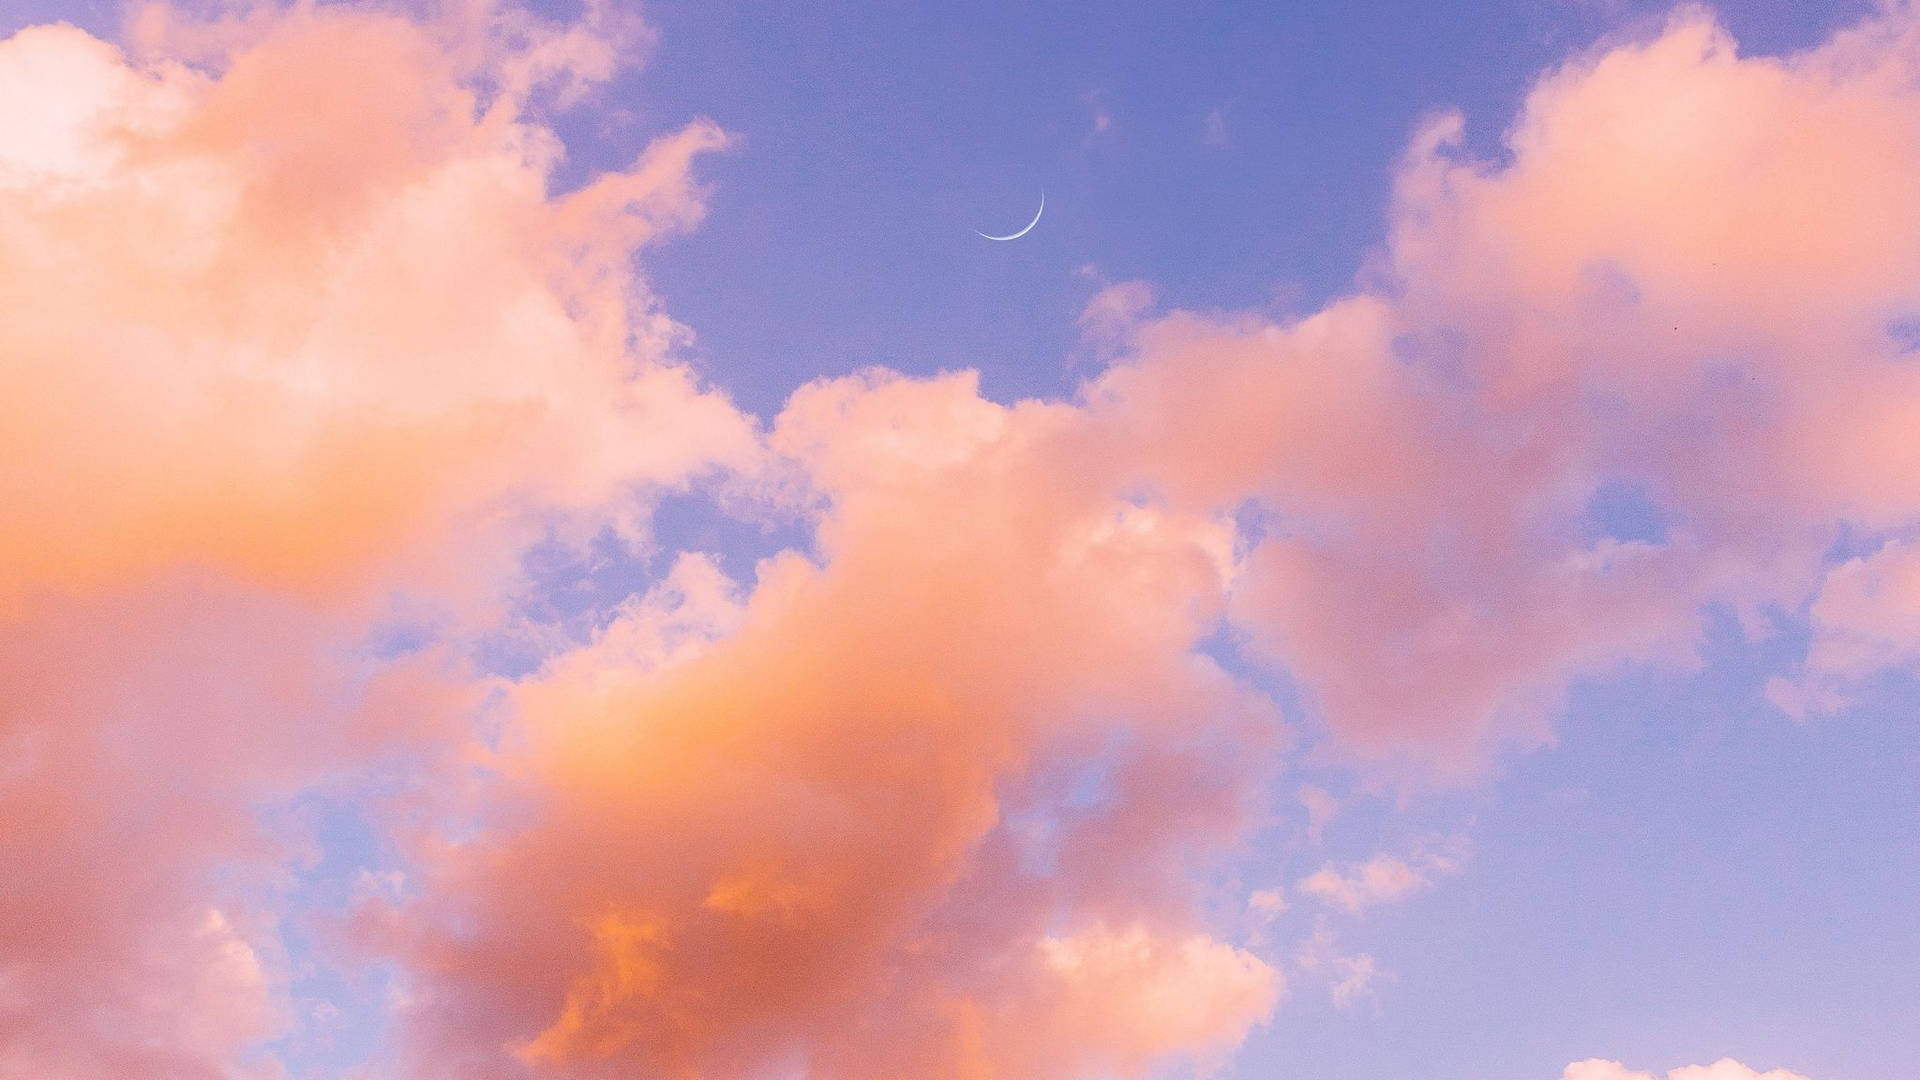 Moon Over The Aesthetic Cloud